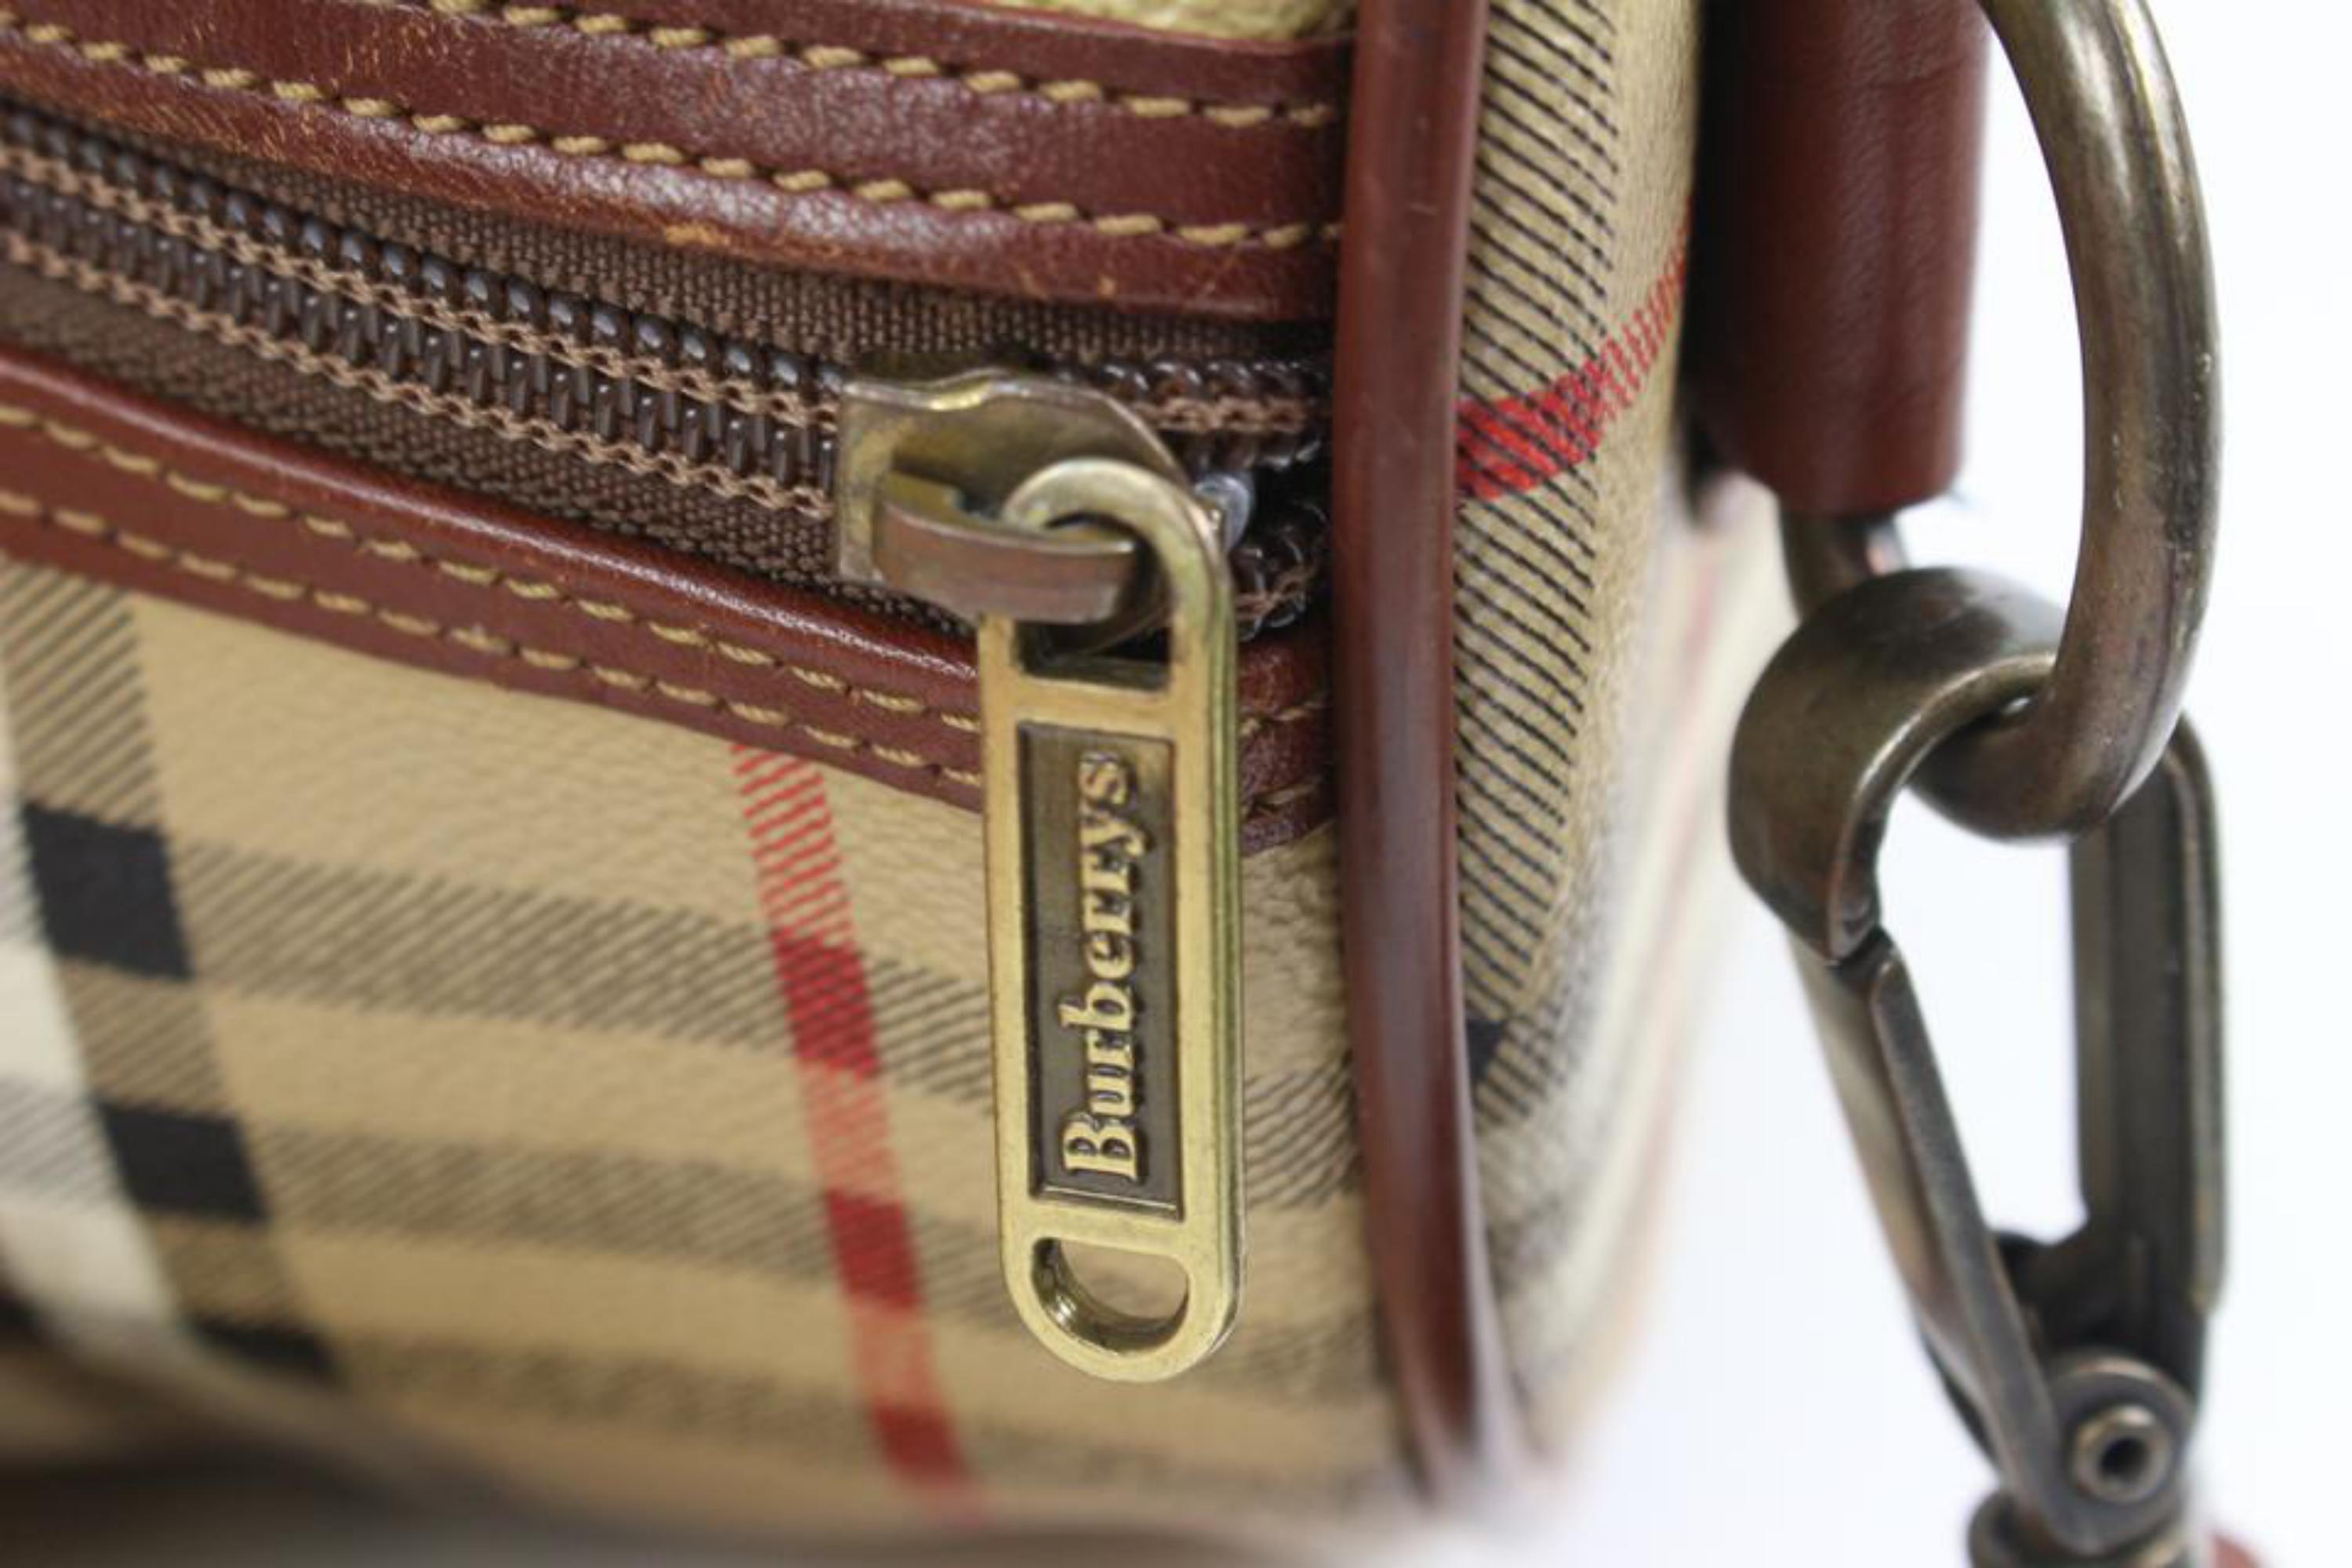 Burberry Beige Nova Check Duffle Bag with Strap Boston Upcycle ready 65b421s For Sale 2